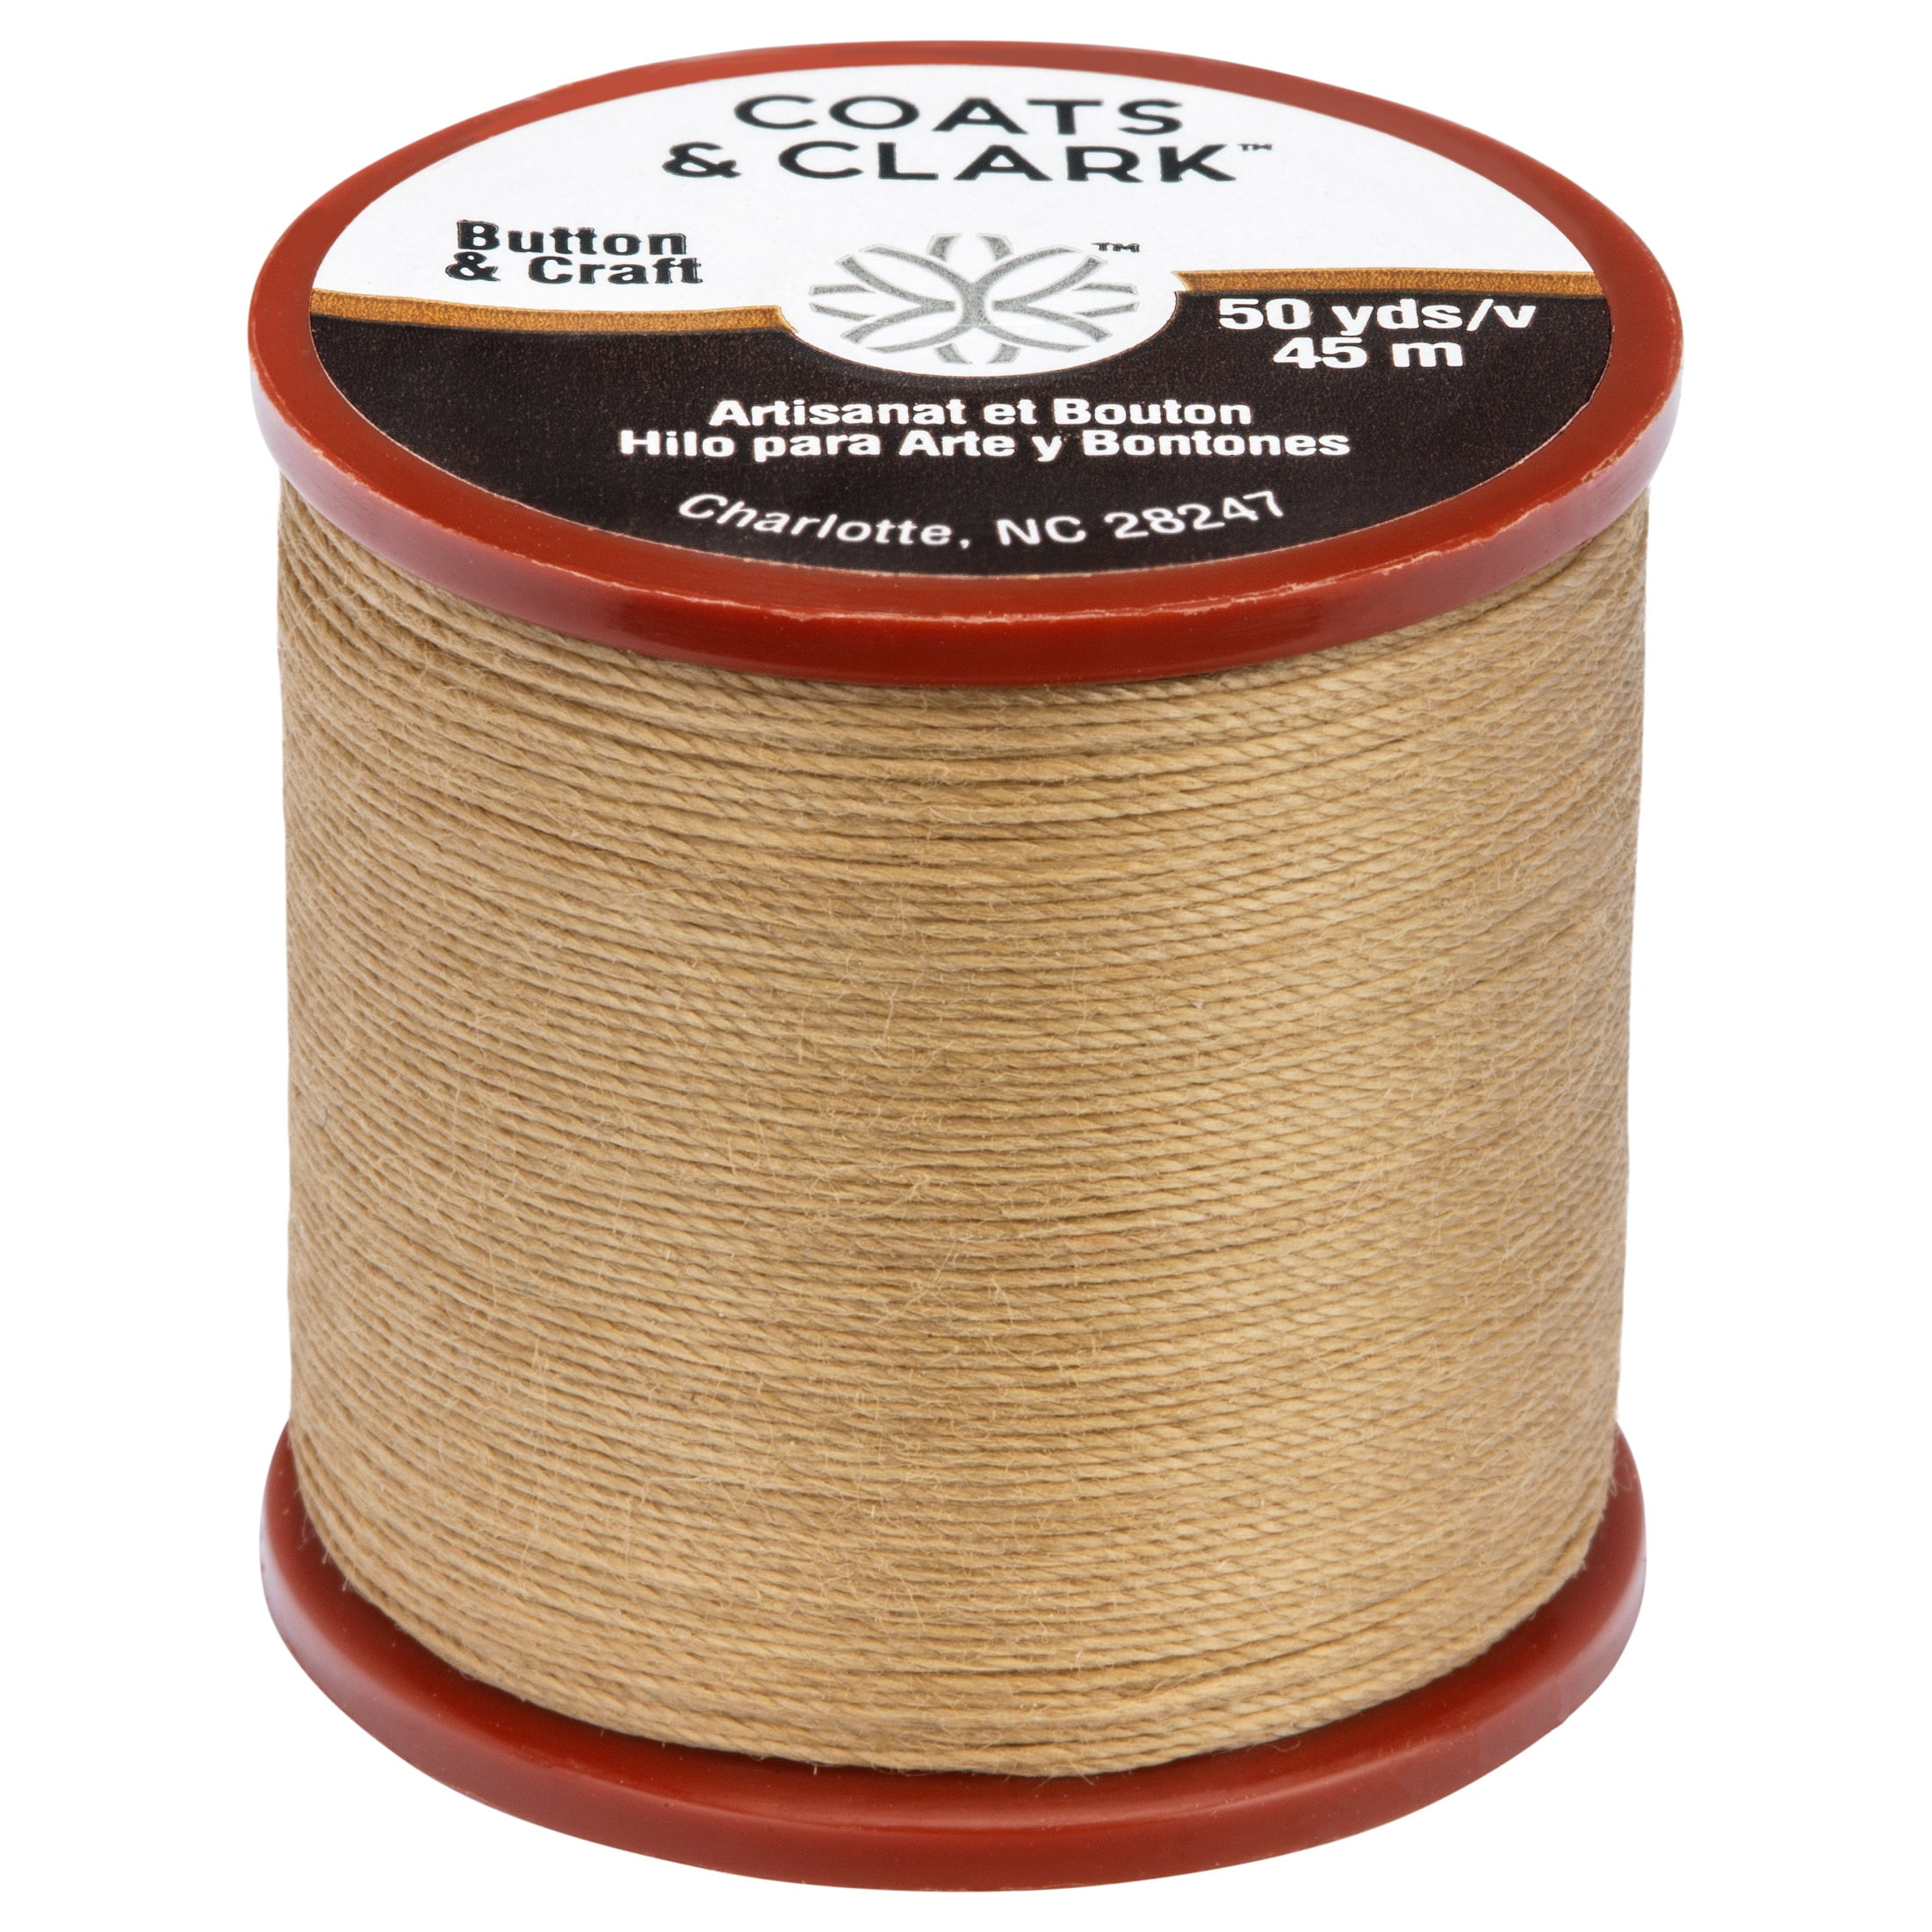 Coats & Clark Dual Duty Plus Button And Craft Thread by Coats